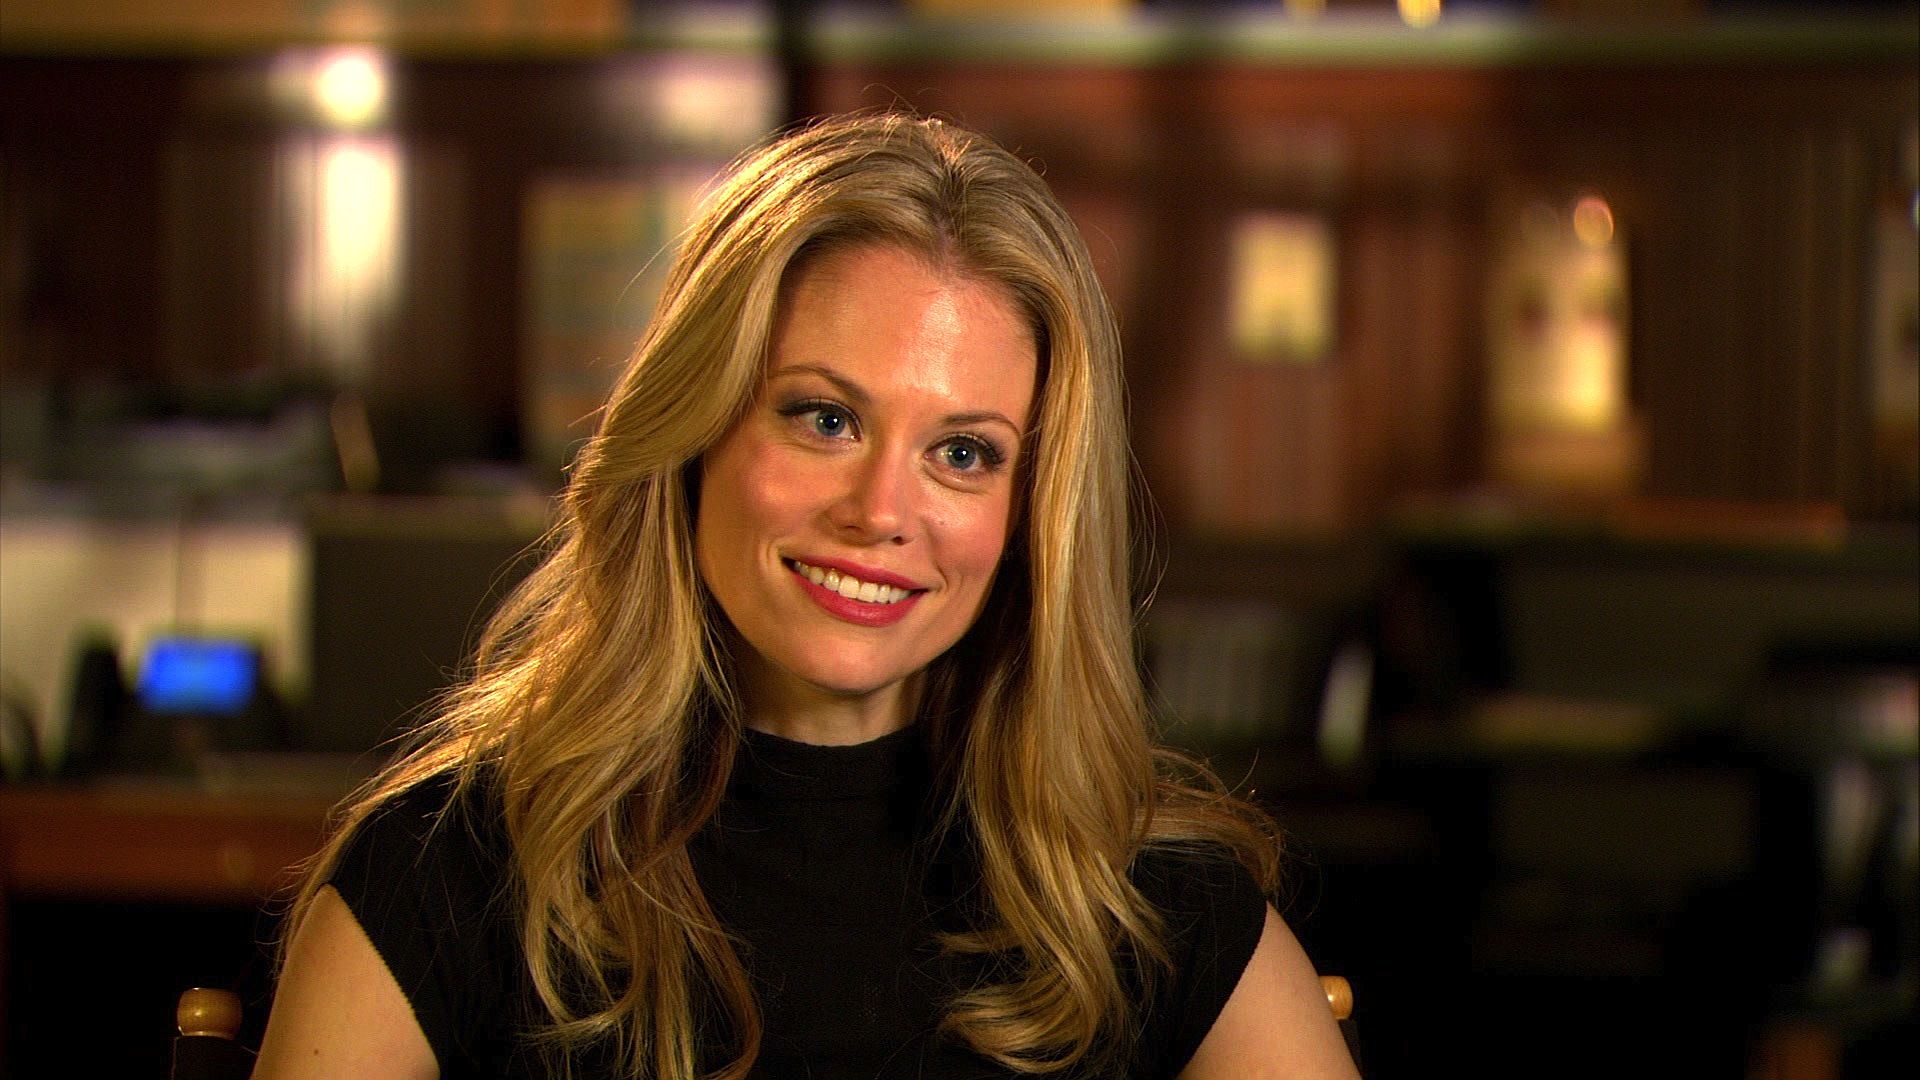 Claire Coffee as Adalind Schade, Grimm, (NBC). Claire coffee, Grimm, Celebrity crush